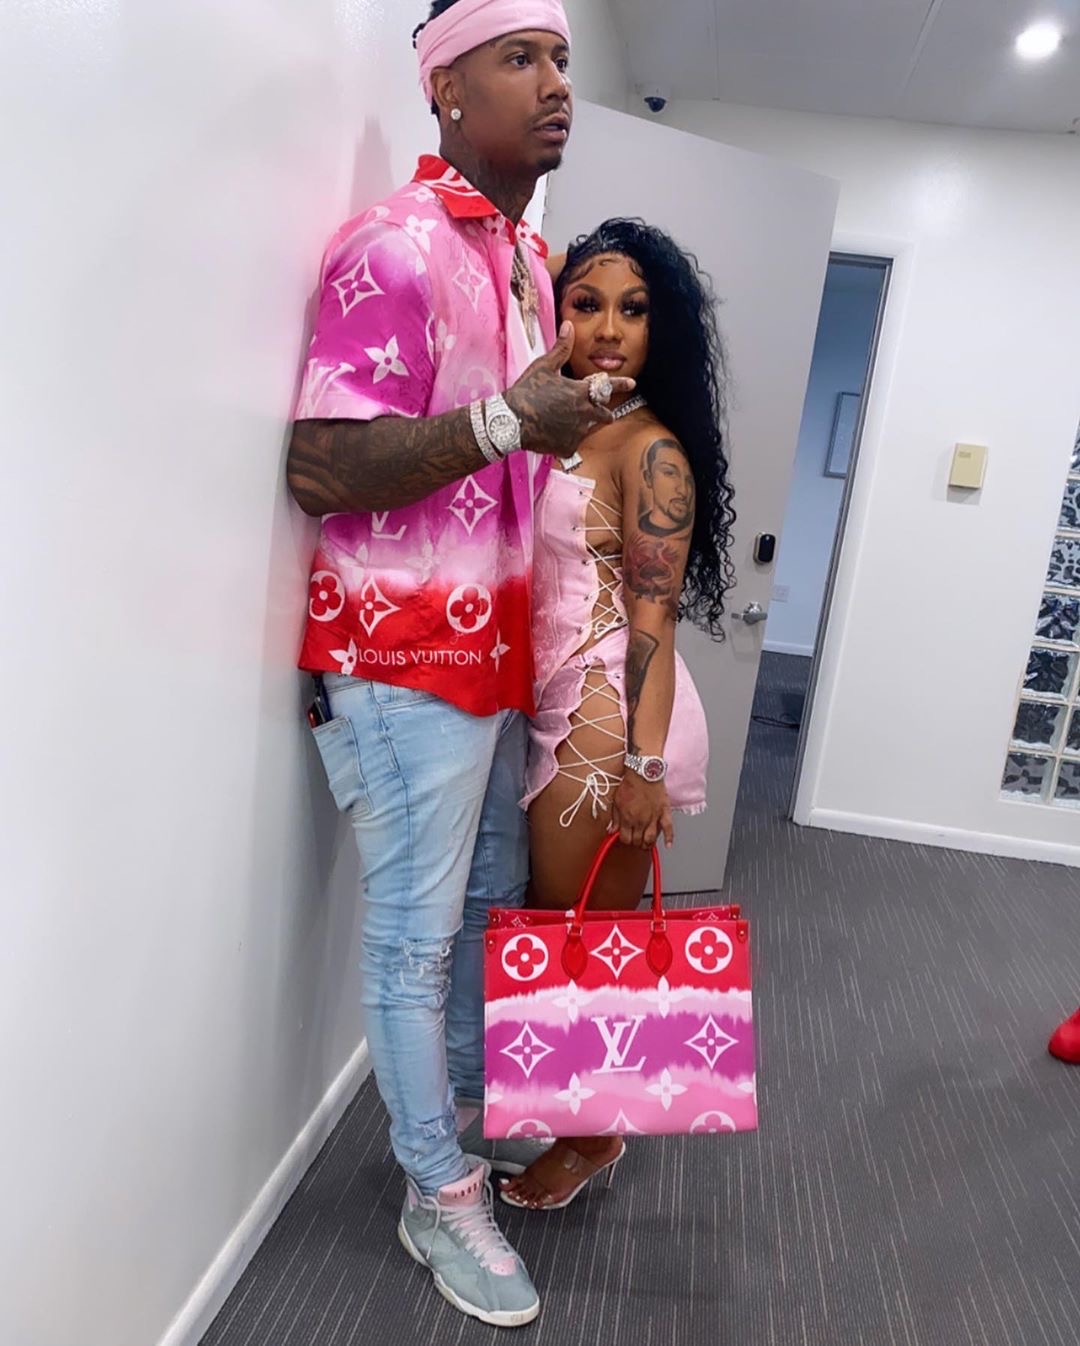 Moneybagg Yo Outfit from November 1, 2020